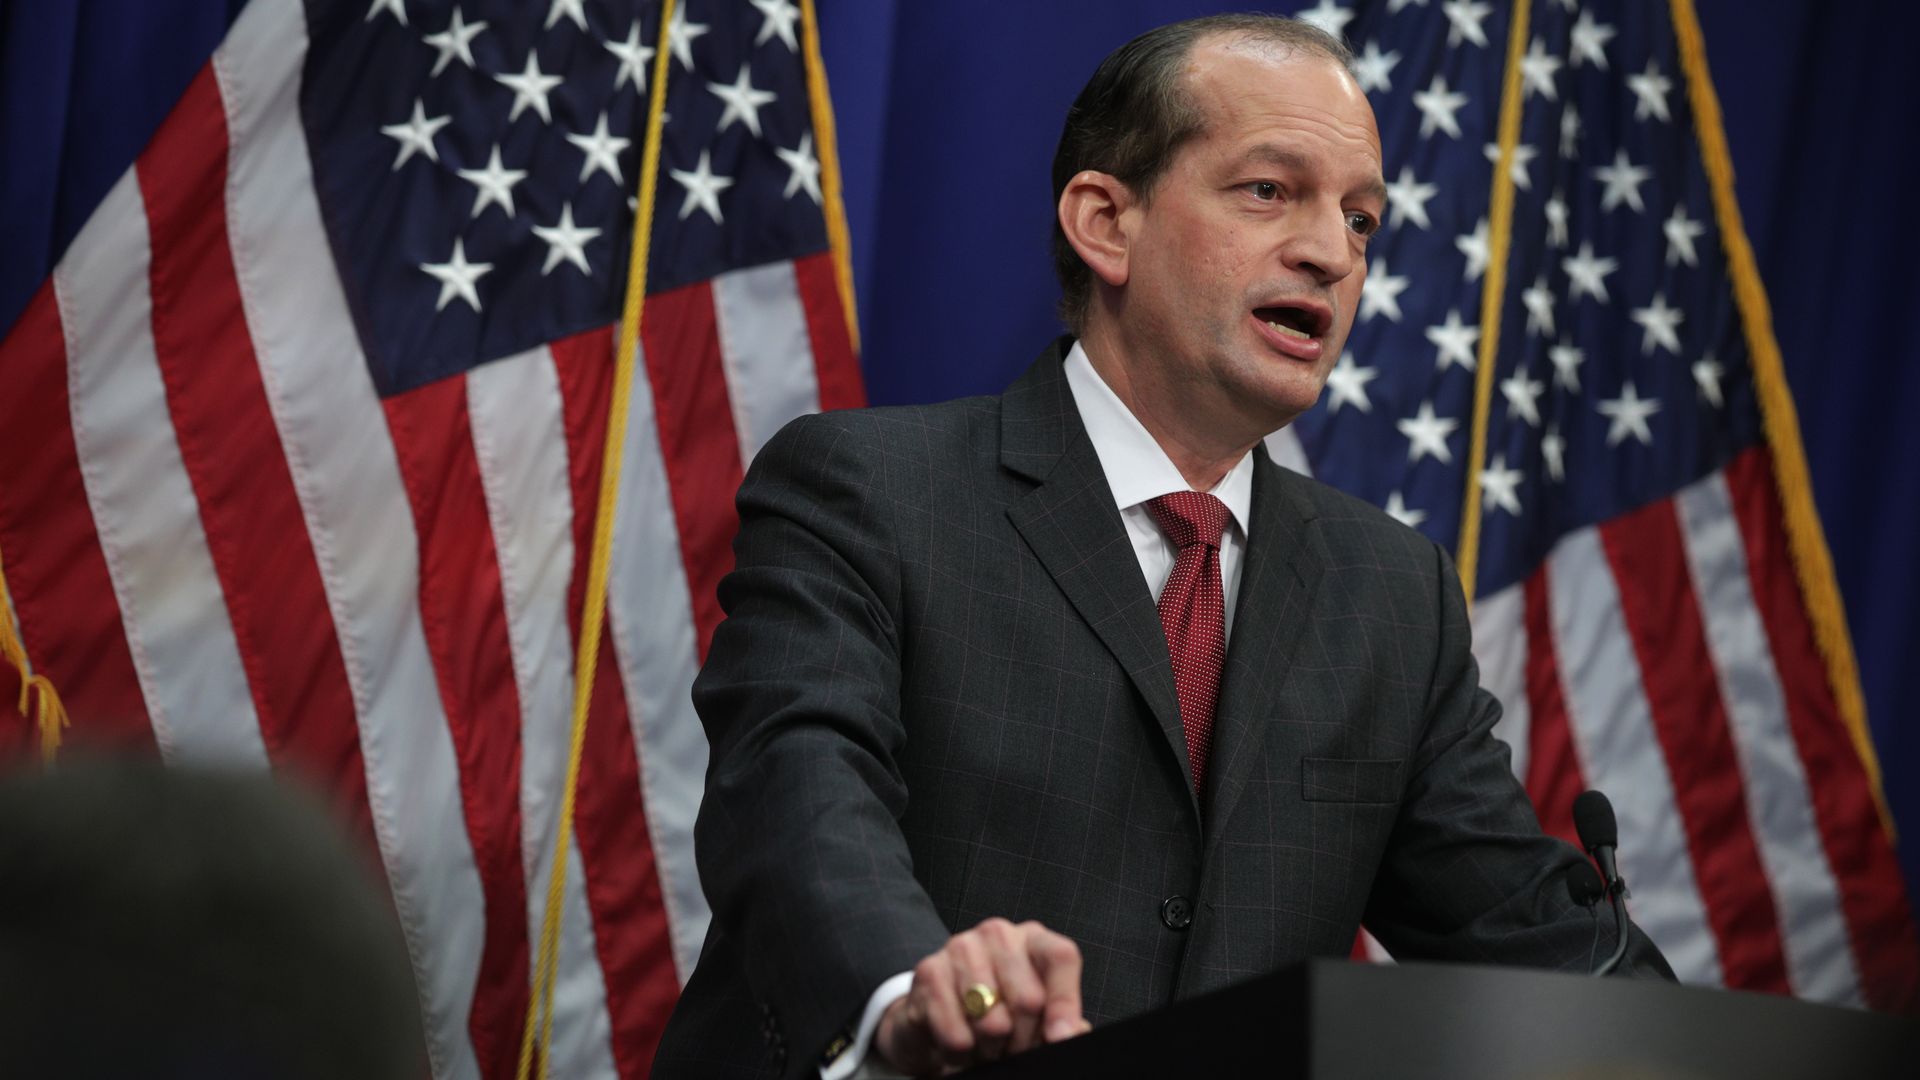 Photo of Alex Acosta standing at a podium with two American flags behind him